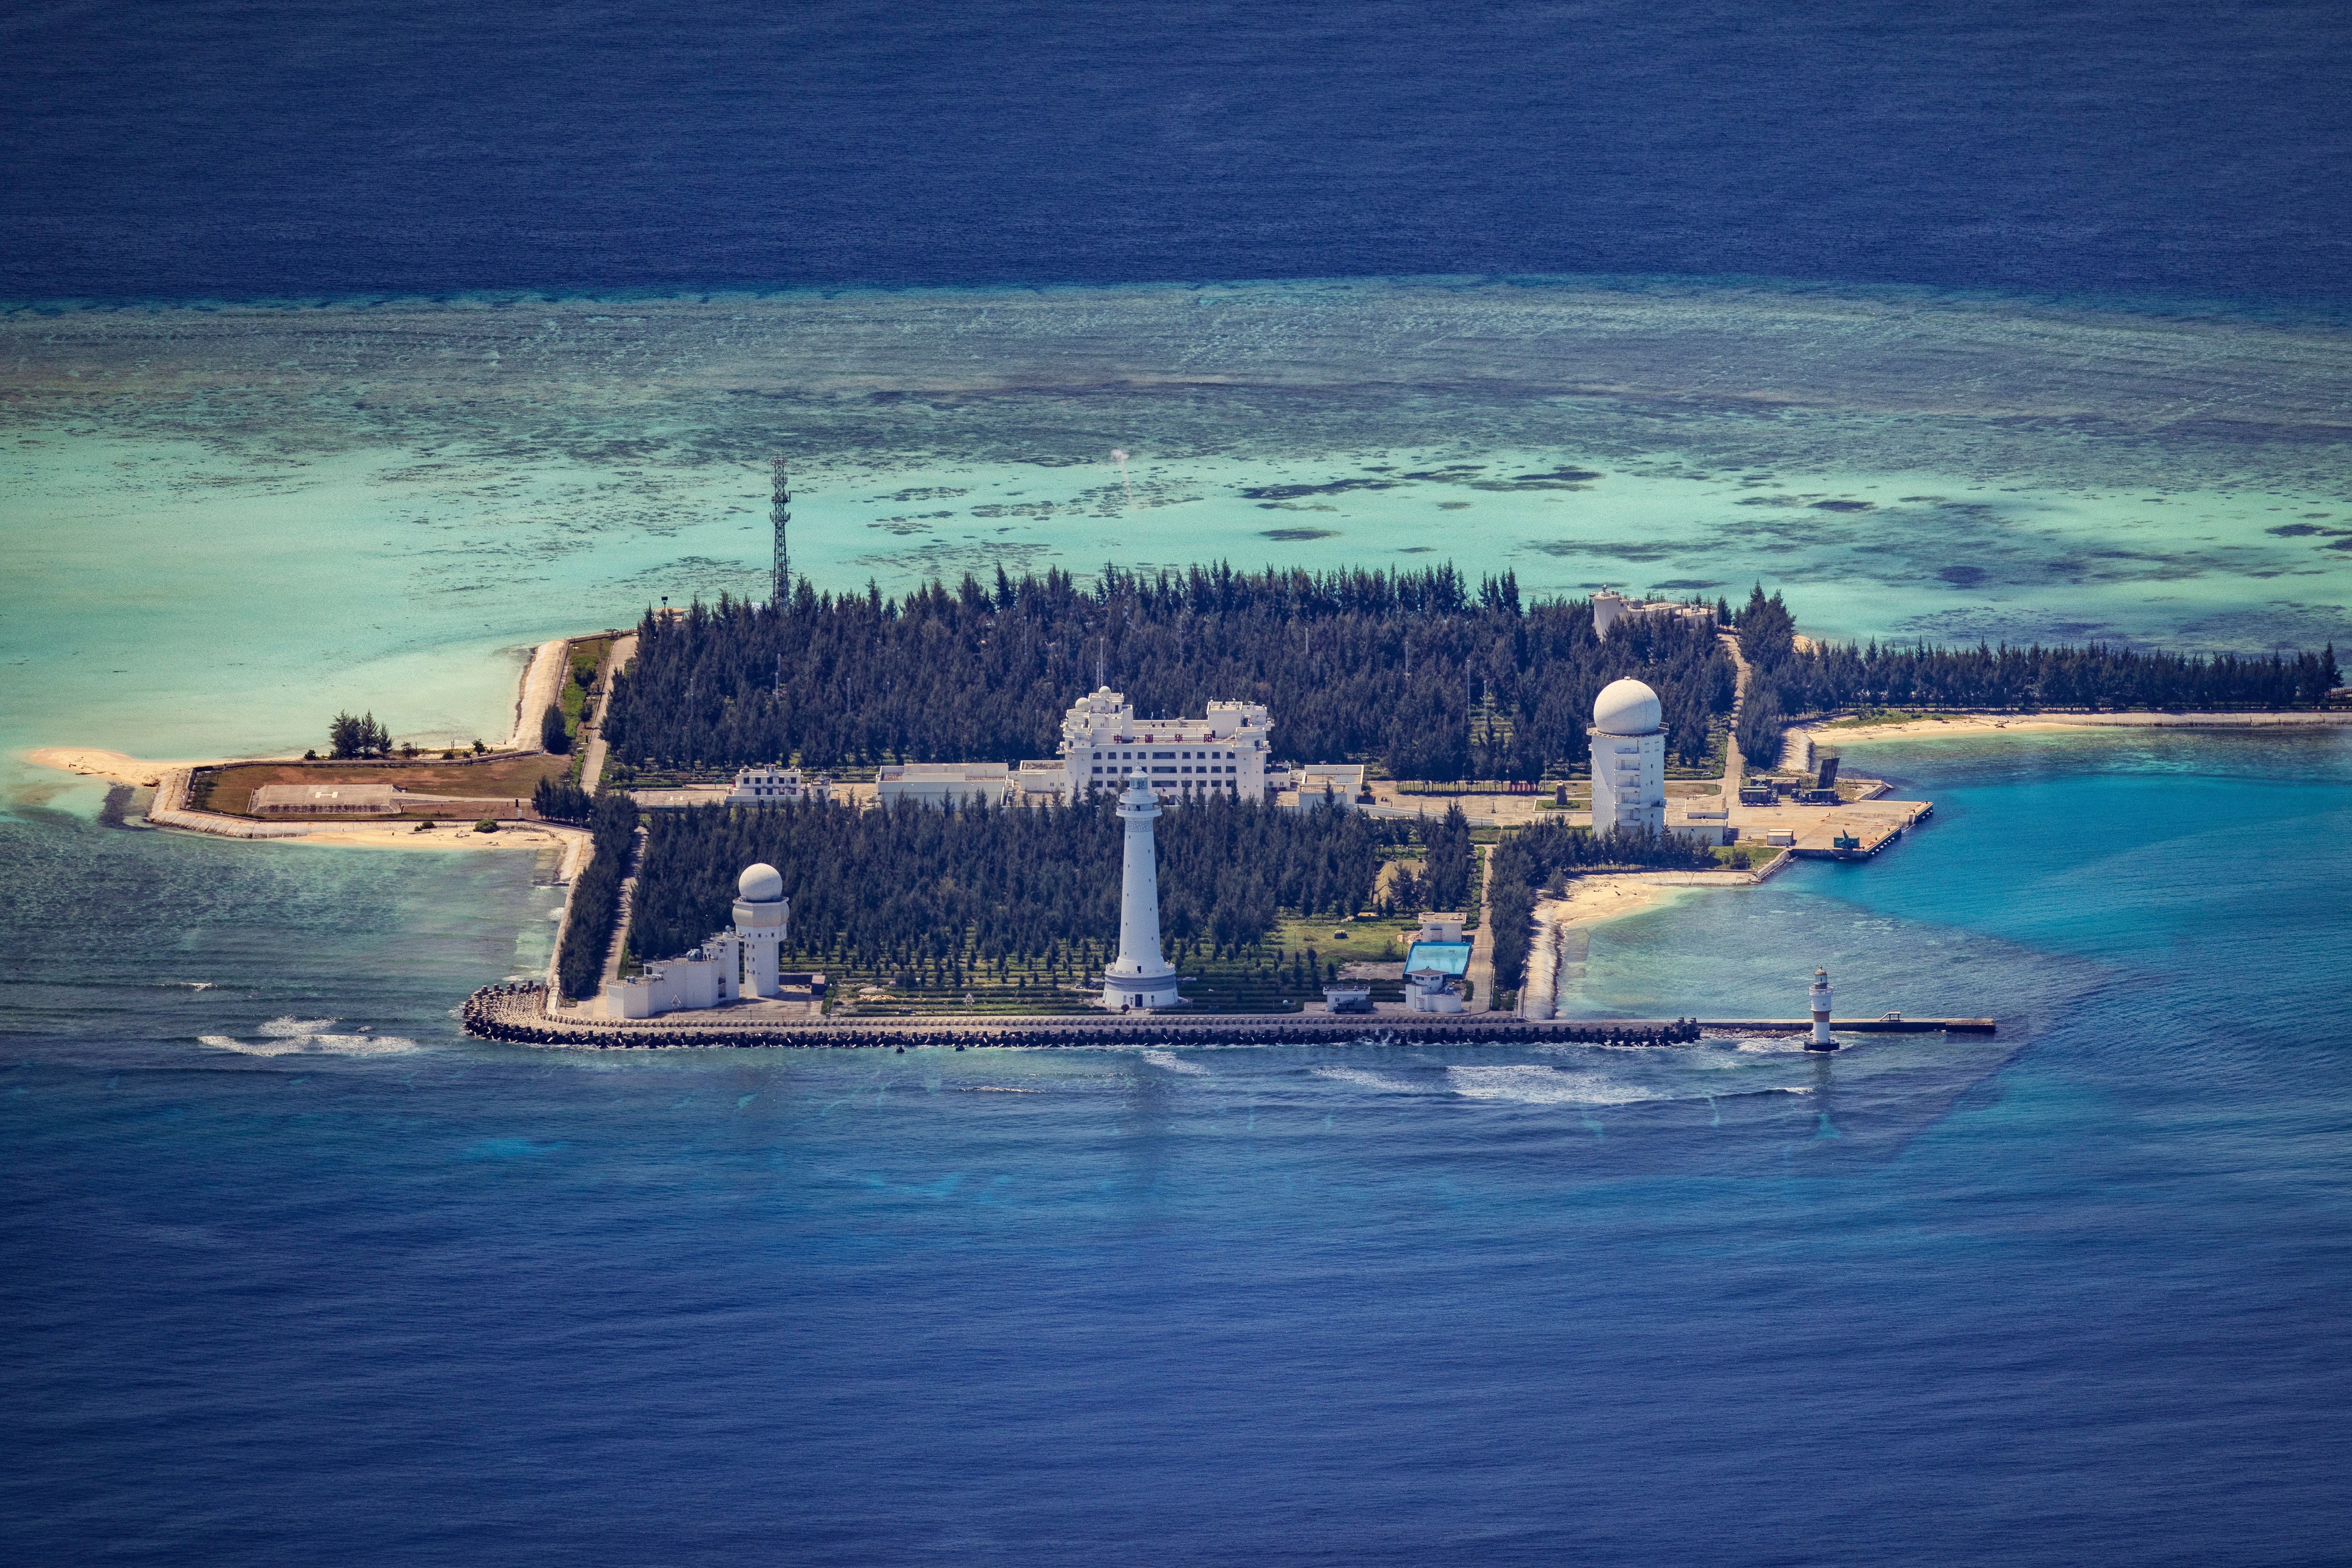 Buildings and structures are seen on the artificial island built by China in Cuarteron Reef on 25 October 2022 in Spratly Islands, South China Sea. China has progressively asserted its claim of ownership over disputed islands in the South China Sea by artificially increasing the size of islands, creating new islands and building ports, military outposts and airstrips. The South China sea is an important trade route and is of significant interest as geopolitical tensions remain high in the region